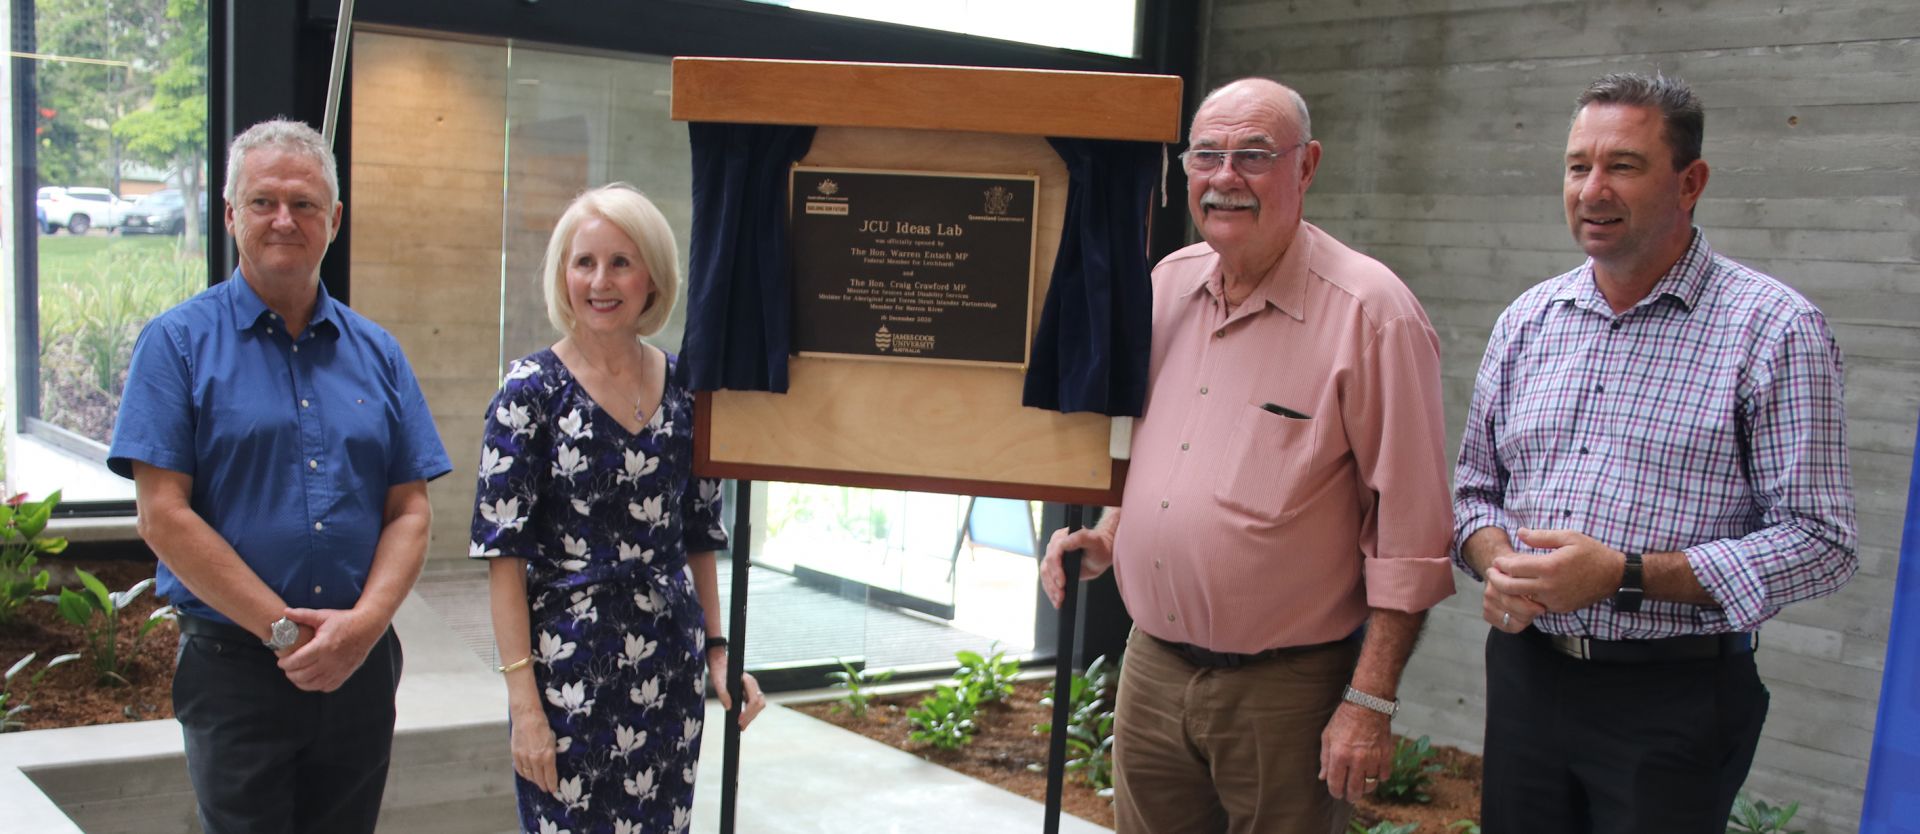 Professor Chris Cocklin, Professor Sandra Harding, Leichhardt MP Warren Entsch and State Member for Barron River Craig Crawford unveiling the plaque for the new building